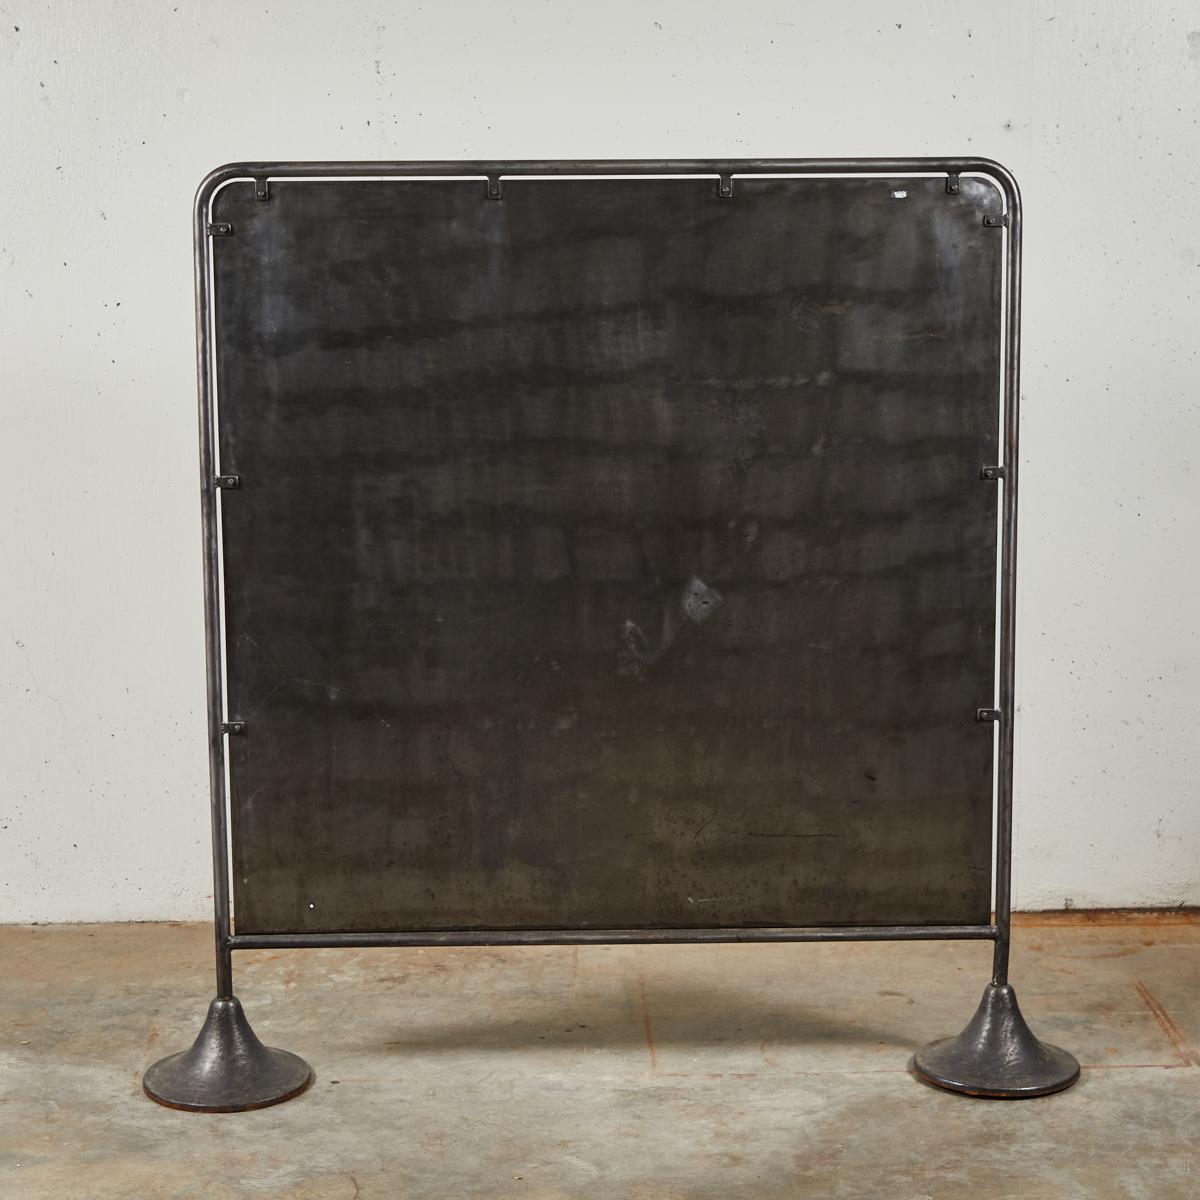 French mid-century burnished metal screen, for use as a spatial divider or head-board. With modernist bell-shaped feet, clean lines, and a steely metallic finish, the piece has a swank, industrial air. Two available.

France, circa 1950

Dimensions: